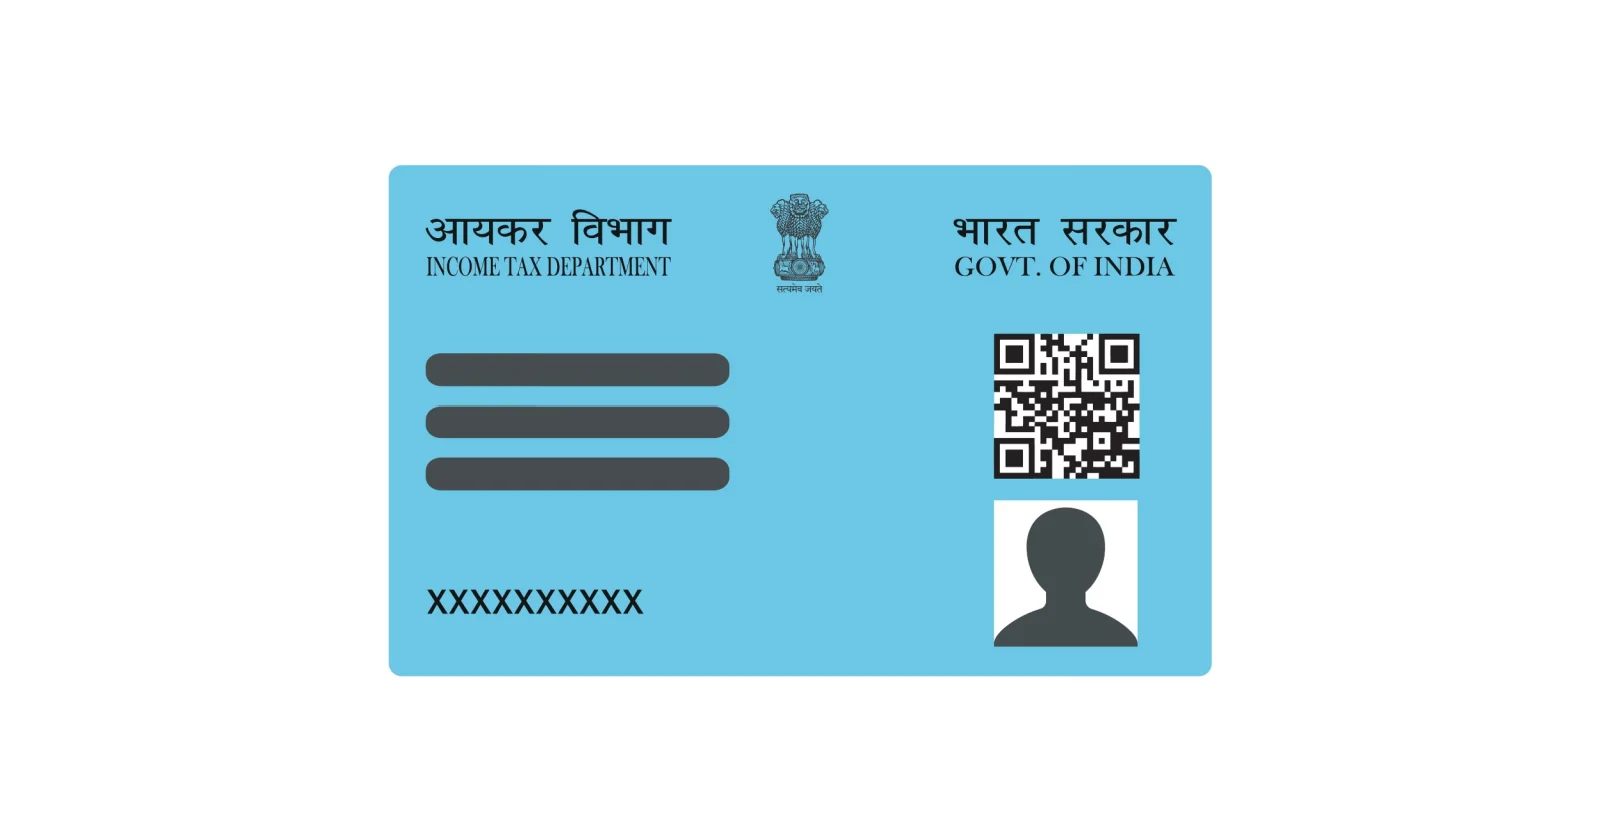 PAN Card Eligibility Criteria: Who Qualifies for a PAN Card in India?